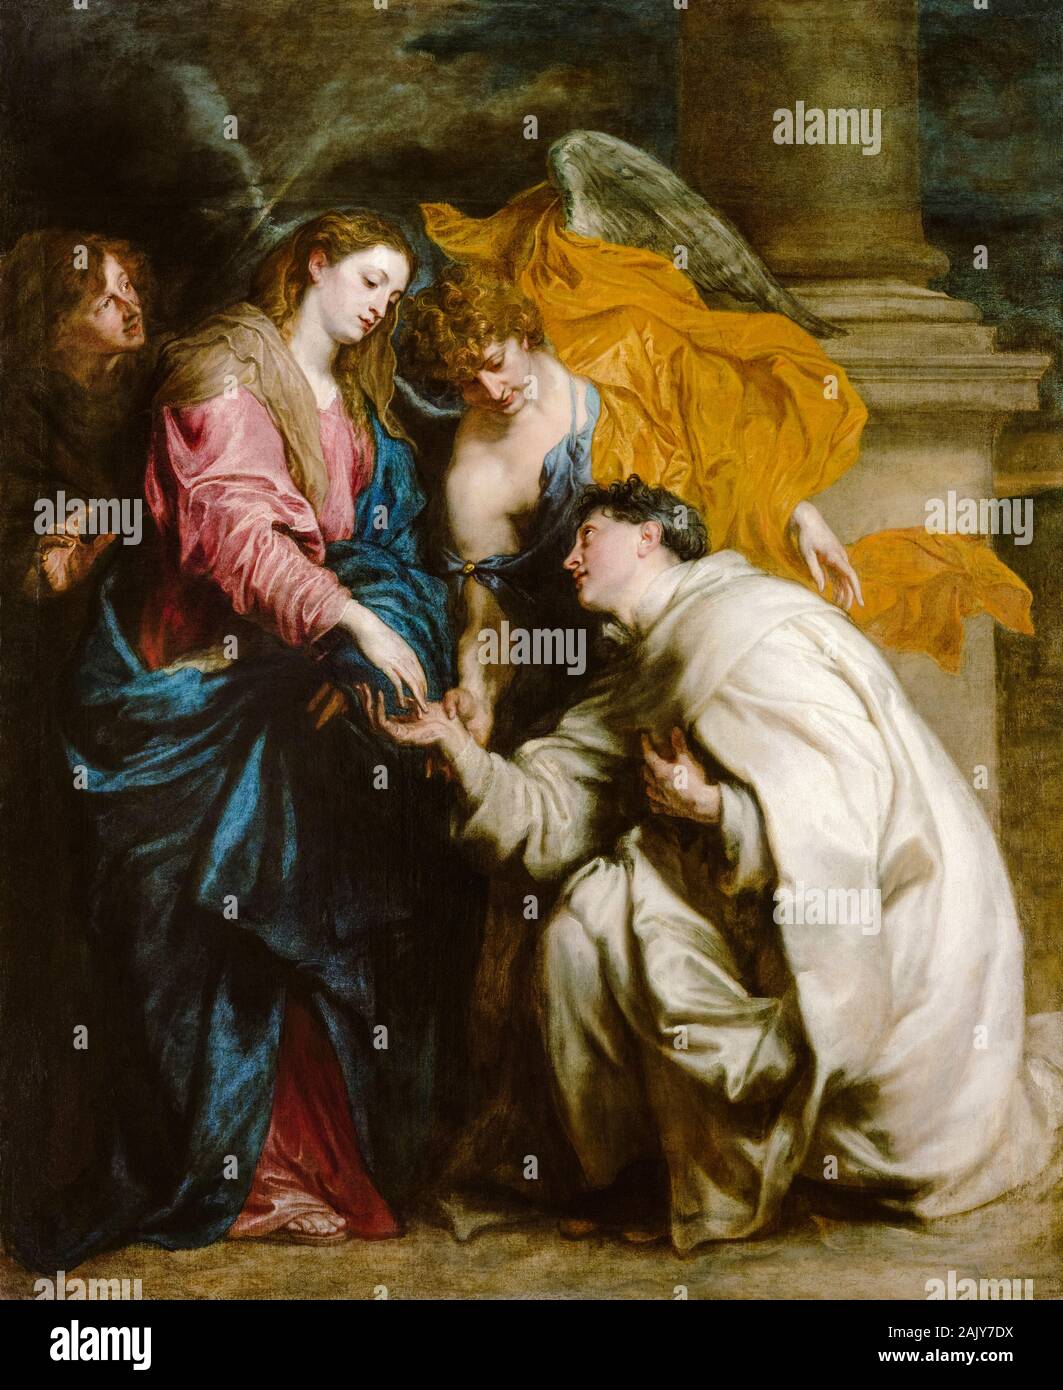 Anthony Van Dyck, painting, The Vision of the Blessed Hermann Joseph, 1629-1630 Stock Photo